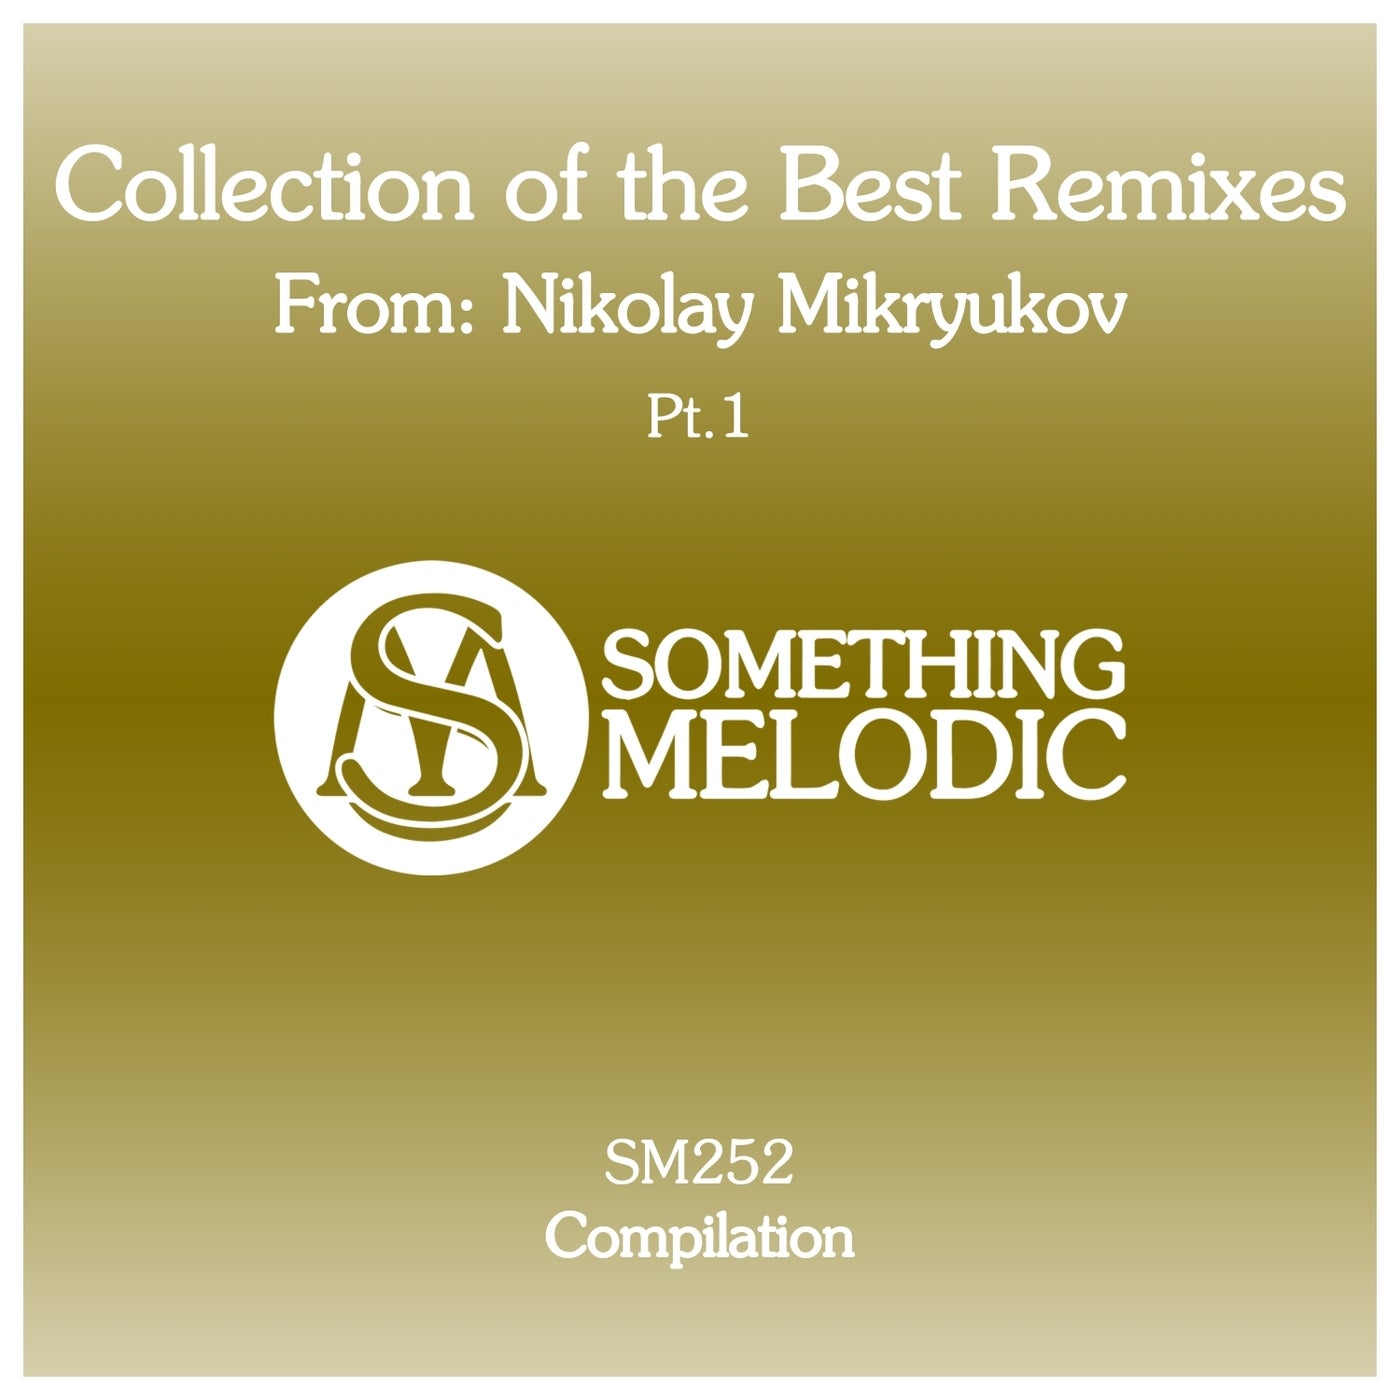 Collection of the Best Remixes From: Nikolay Mikryukov, Pt. 1